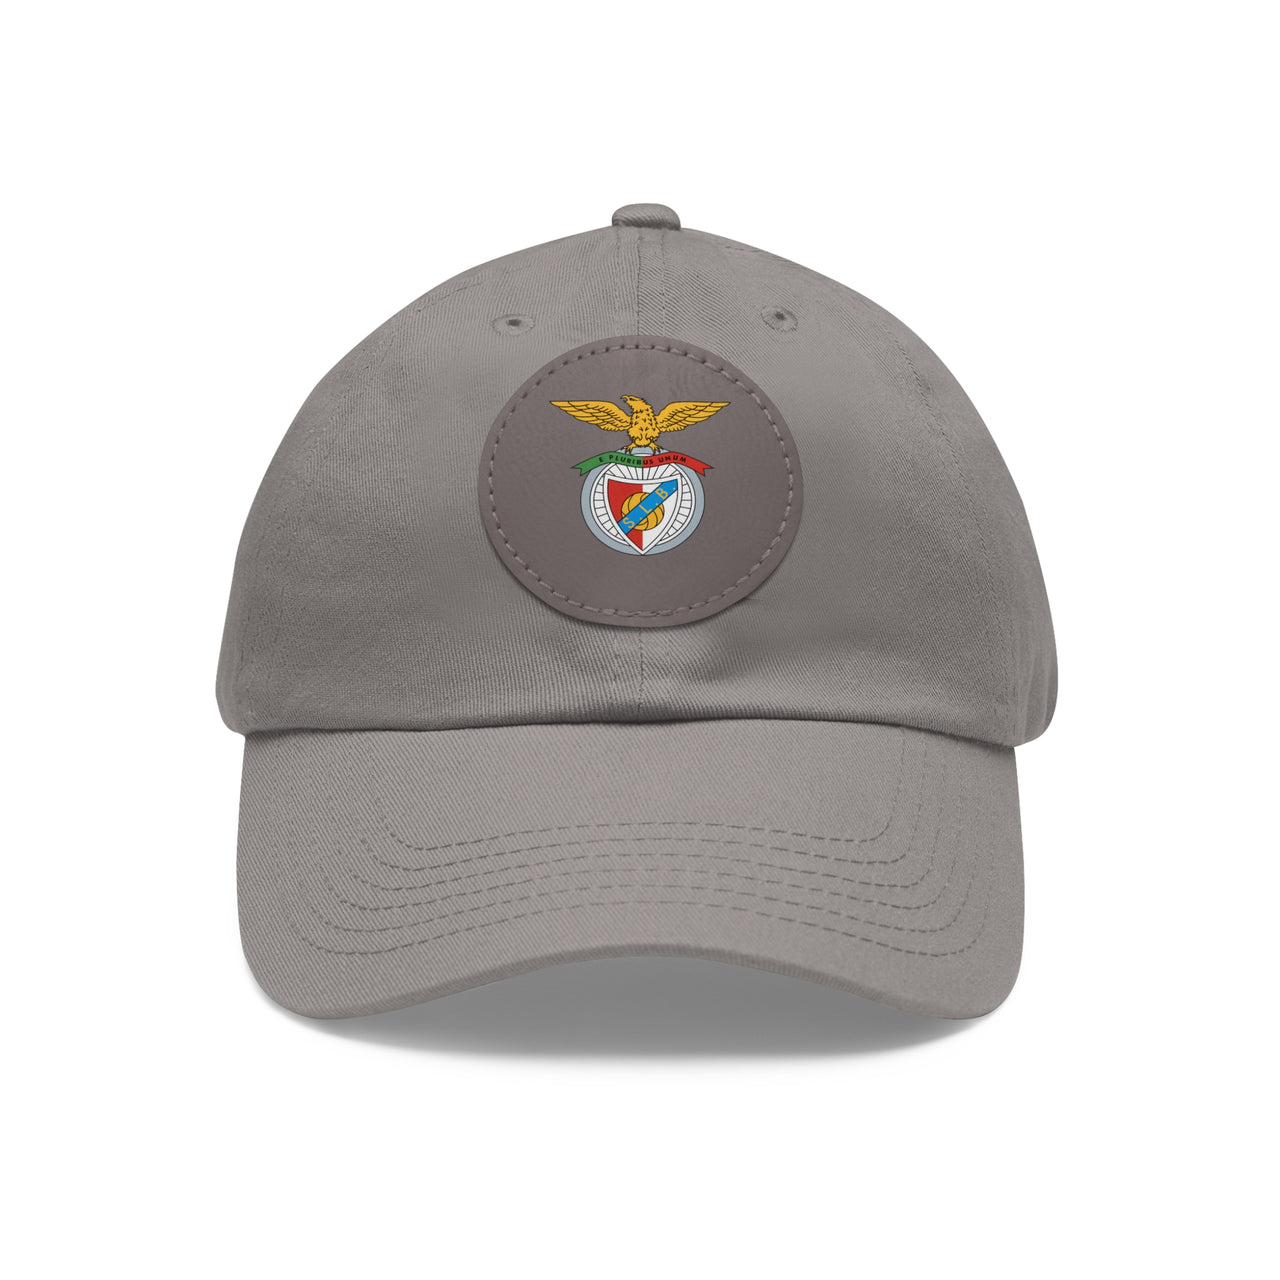 Benfica Dad Hat with Leather Patch (Round)